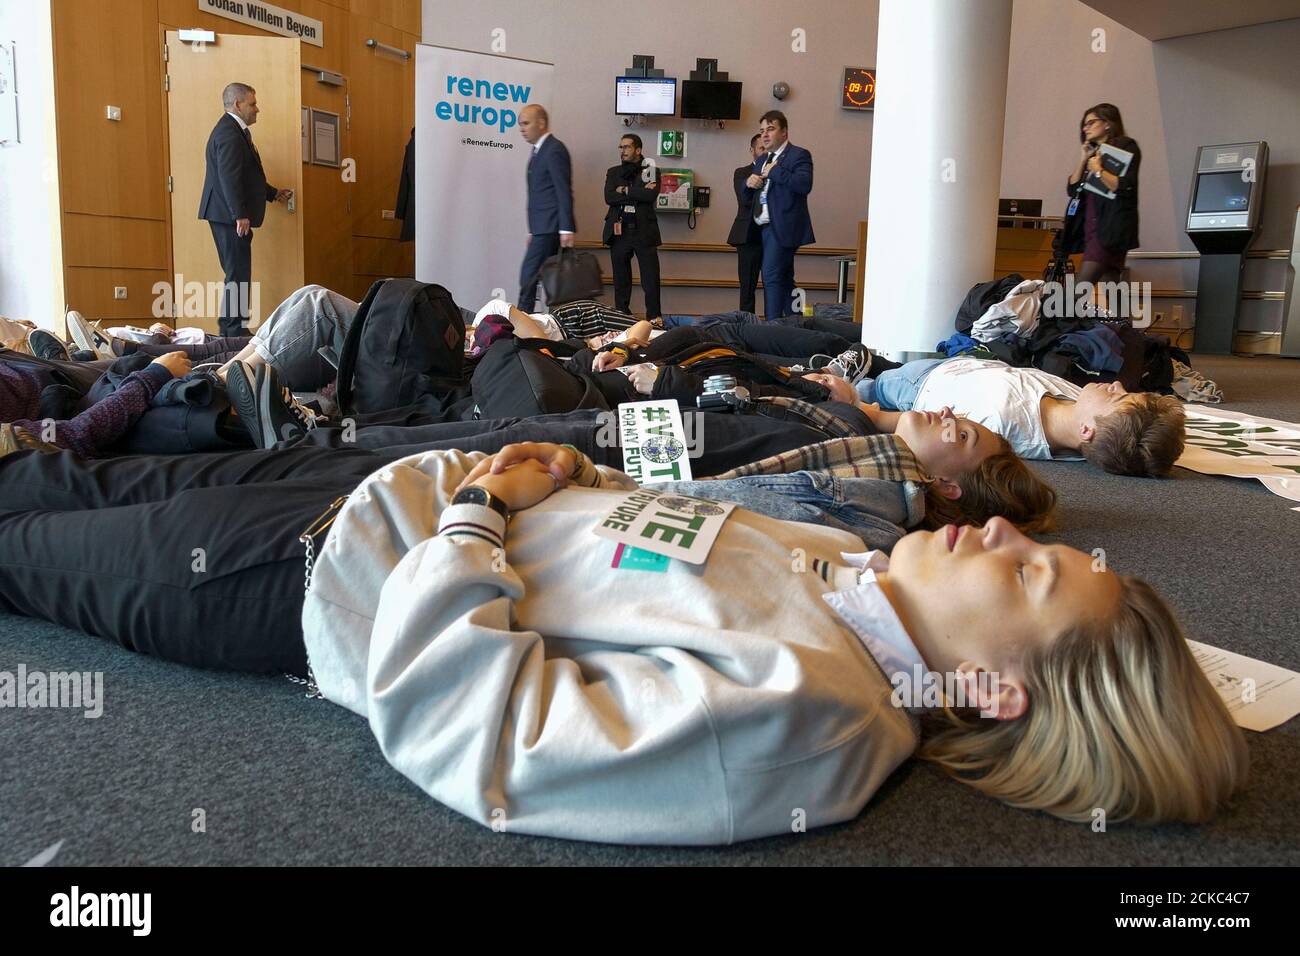 Youth for Climate activists stage a die-in to demand more ambitious climate goals to be set by EU lawmakers, during a protest inside the EU Parliament in Brussels, Belgium, November 20, 2019. REUTERS/Christian Levaux Stock Photo